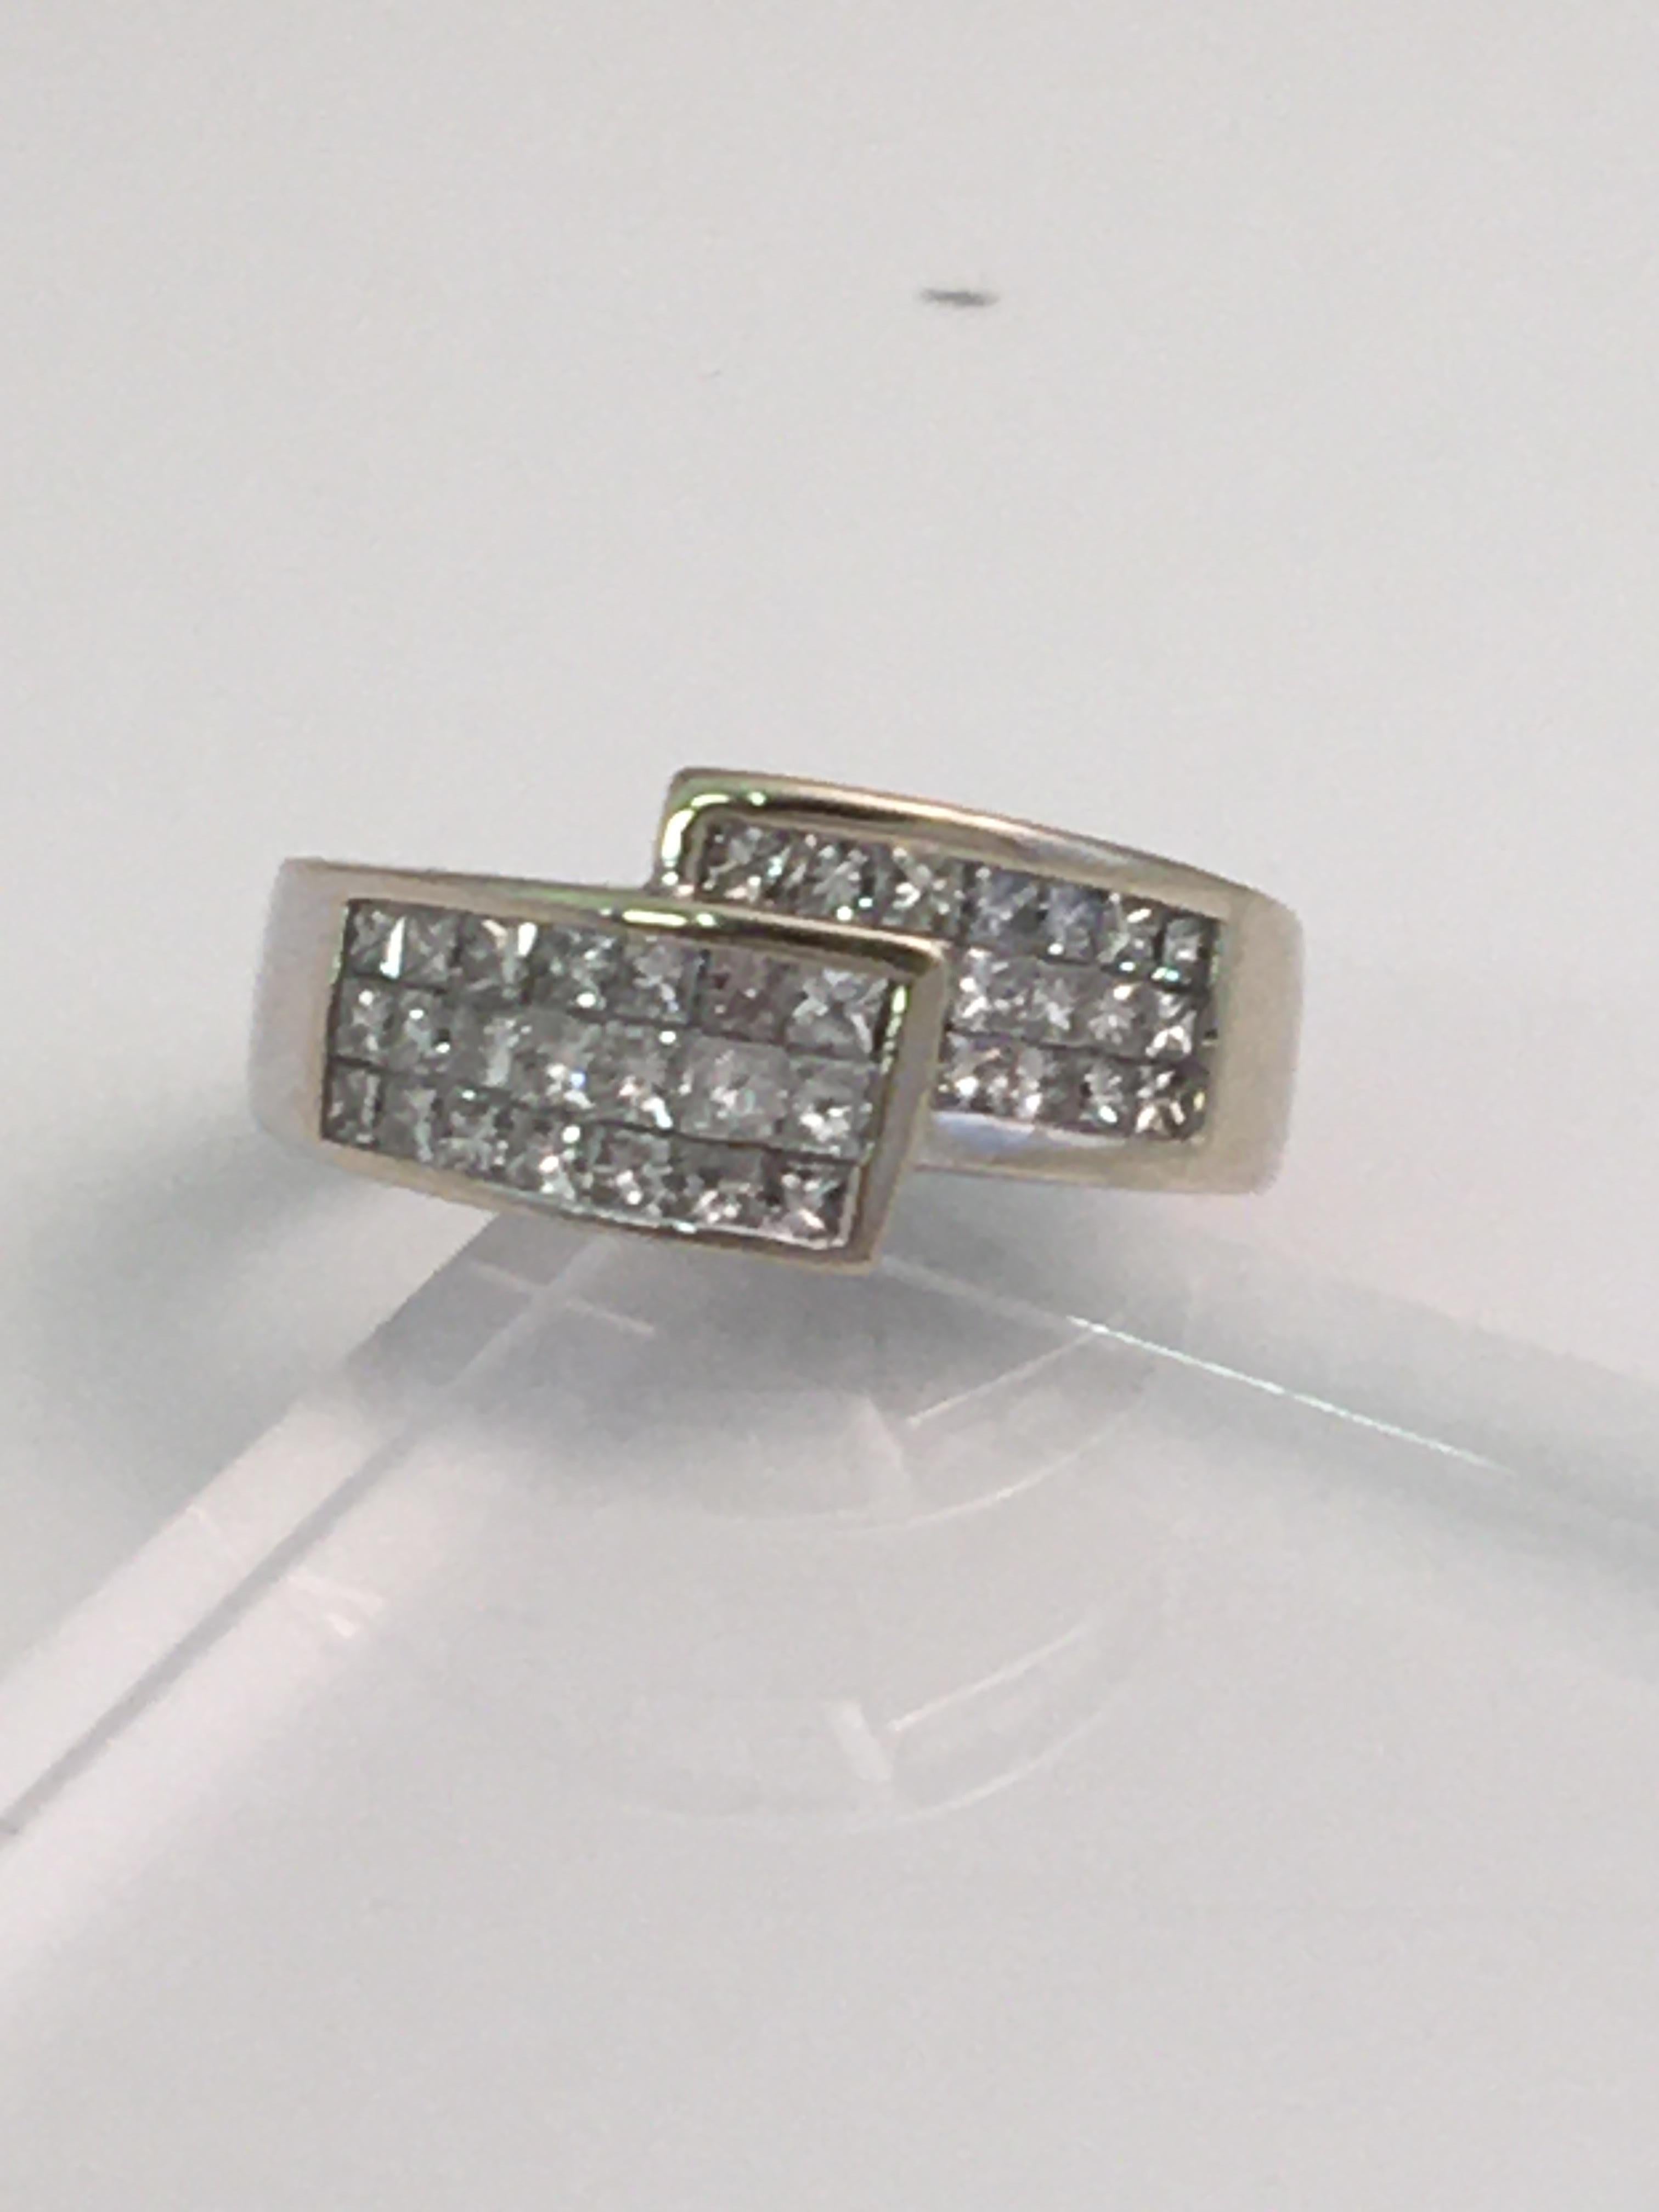 This beautiful bypass ring is easy to wear and looks good on any finger.
36 square cut diamonds approximately 1.50 total diamond weight
G-H VS-SI quality diamonds, invisibly set
14 karat white gold 
Stamped 